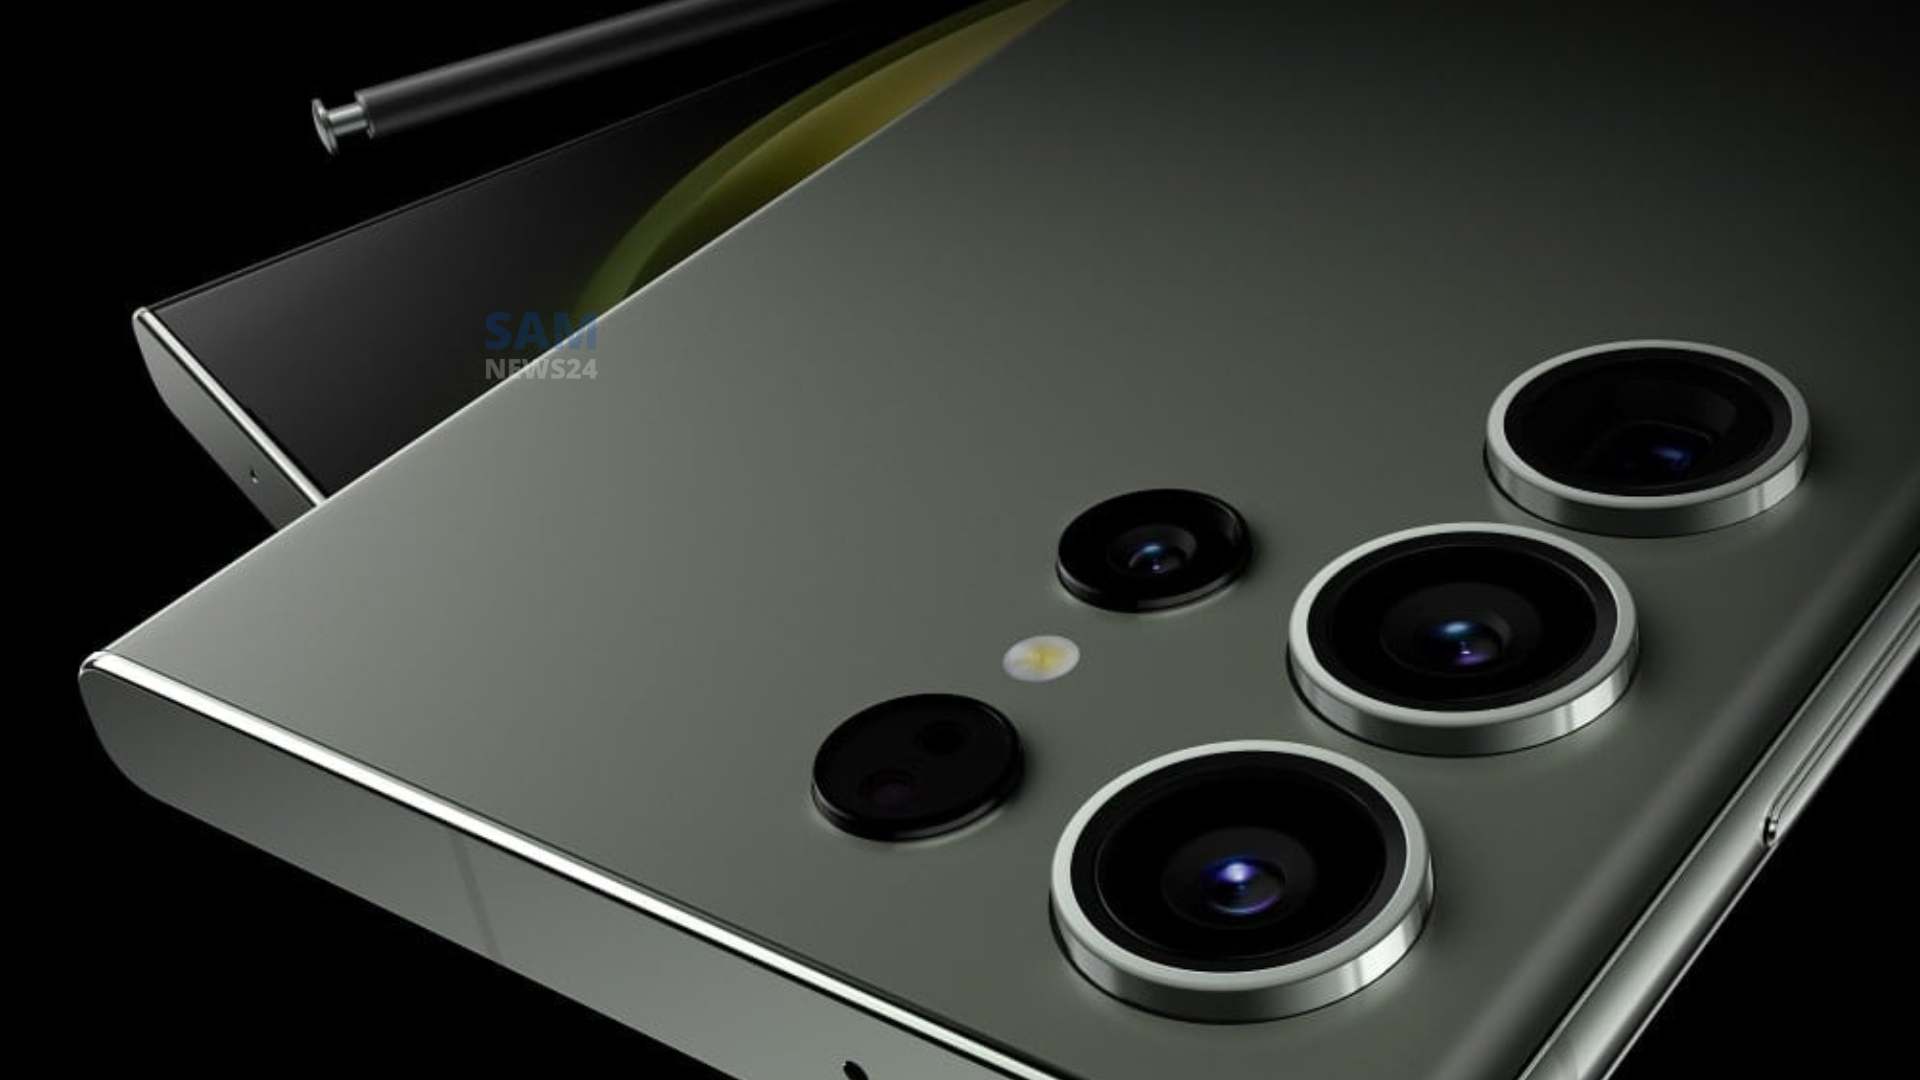 Samsung Galaxy S24 Ultra could feature variable aperture F1.2 to 4.0